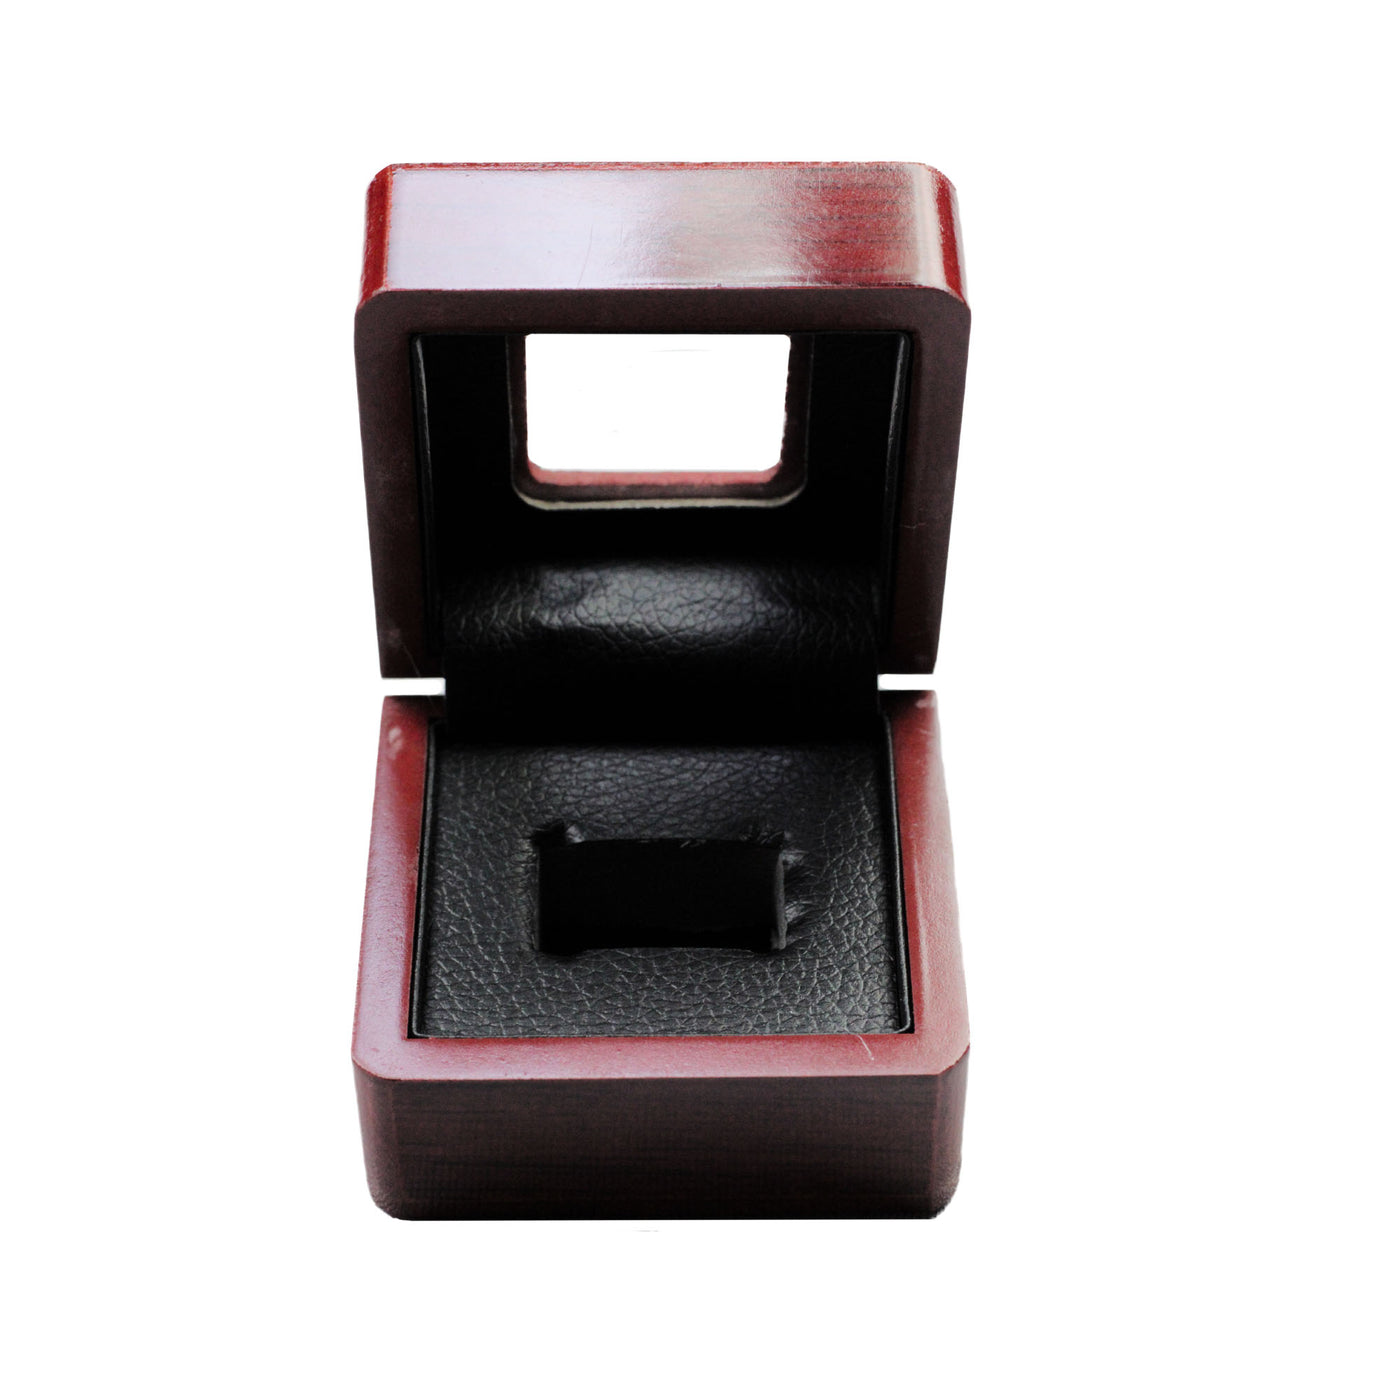 RING BOX - Style 2 (holds 1)